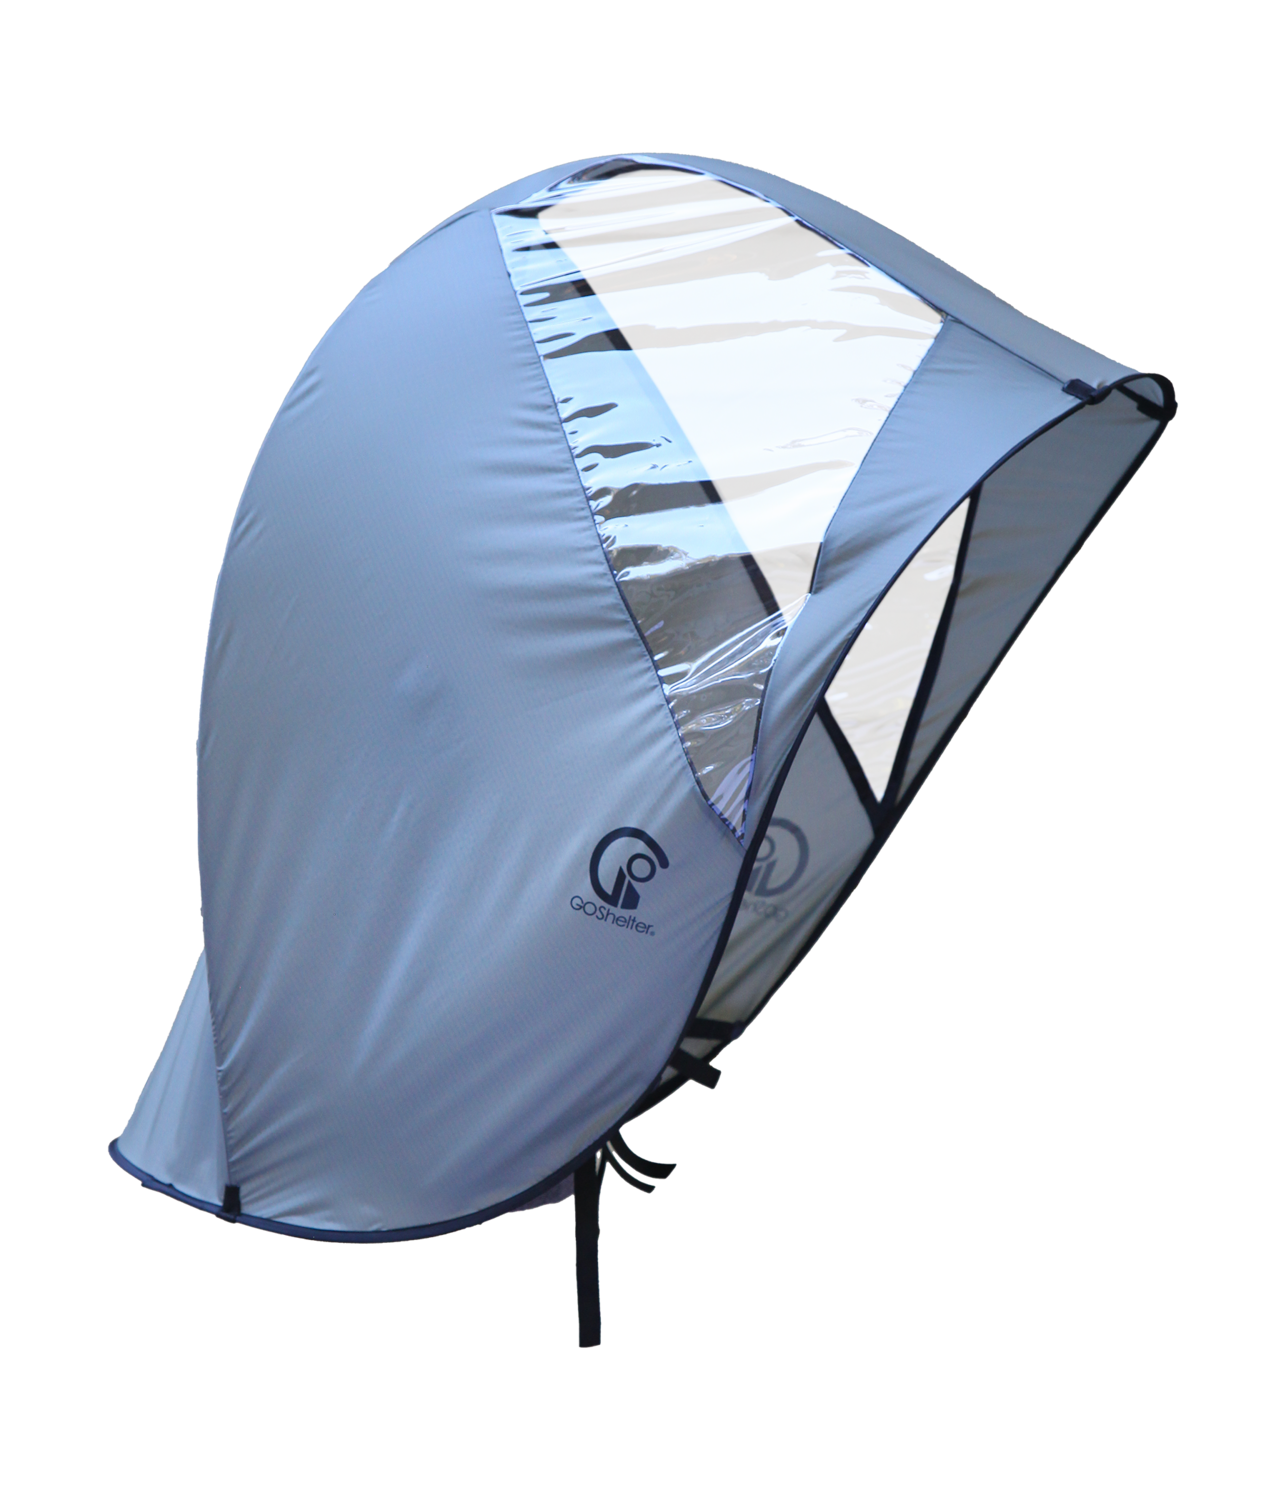 Go Shelter Wearable Mobile Canopy